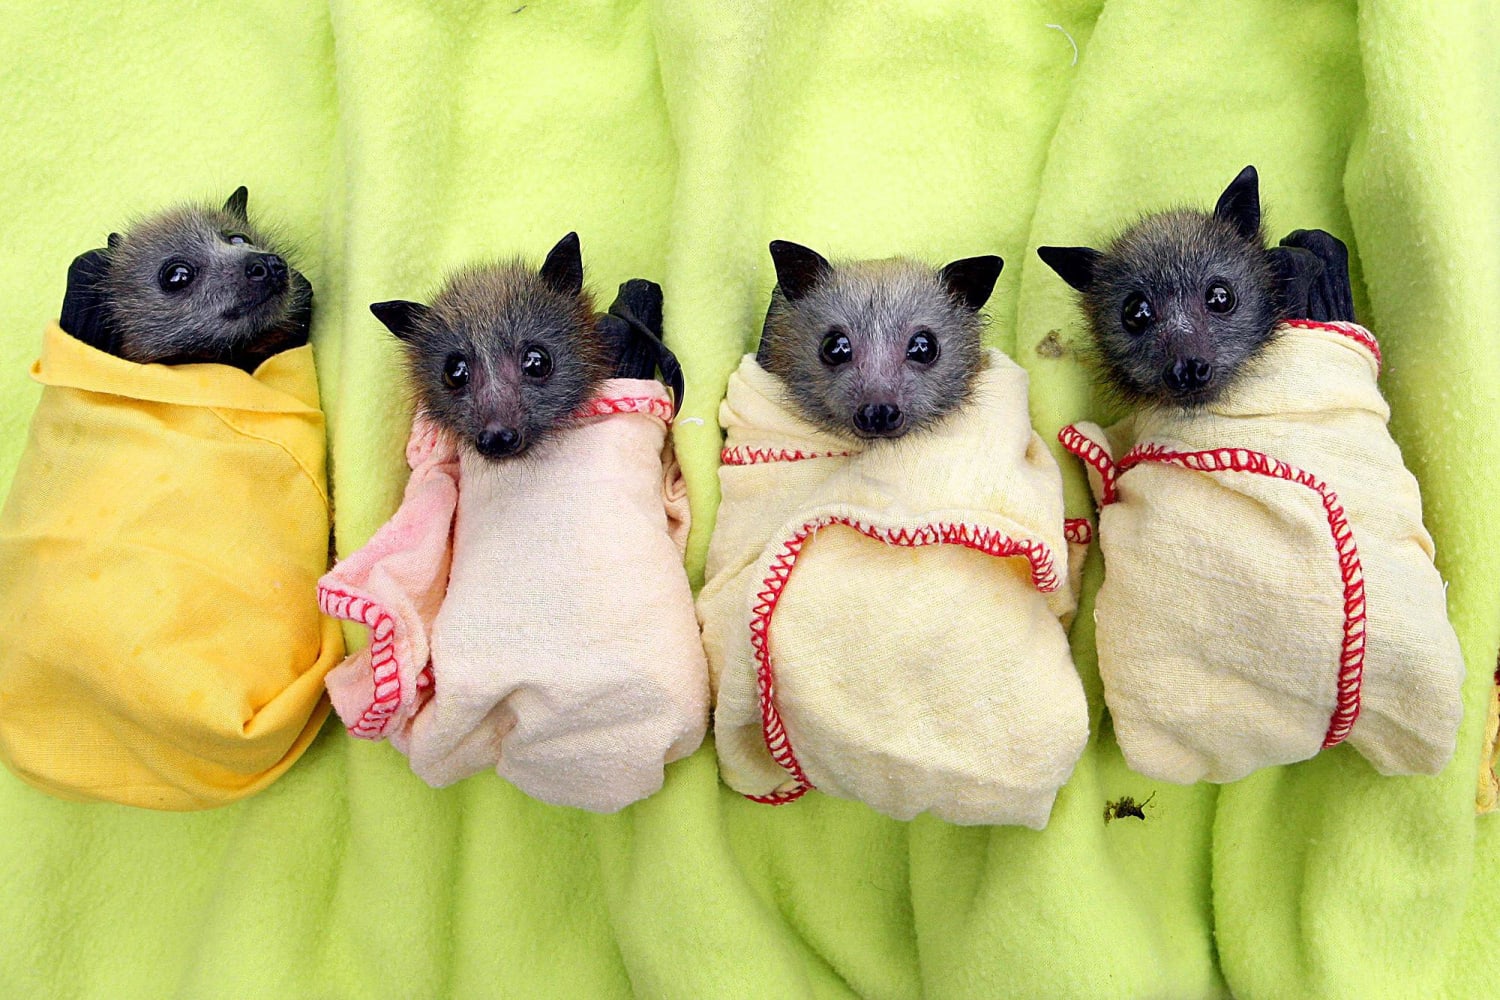 Orphaned baby bats which are rescued are wrapped snugly in blankets to mimic the warm embrace of their mother's wings.